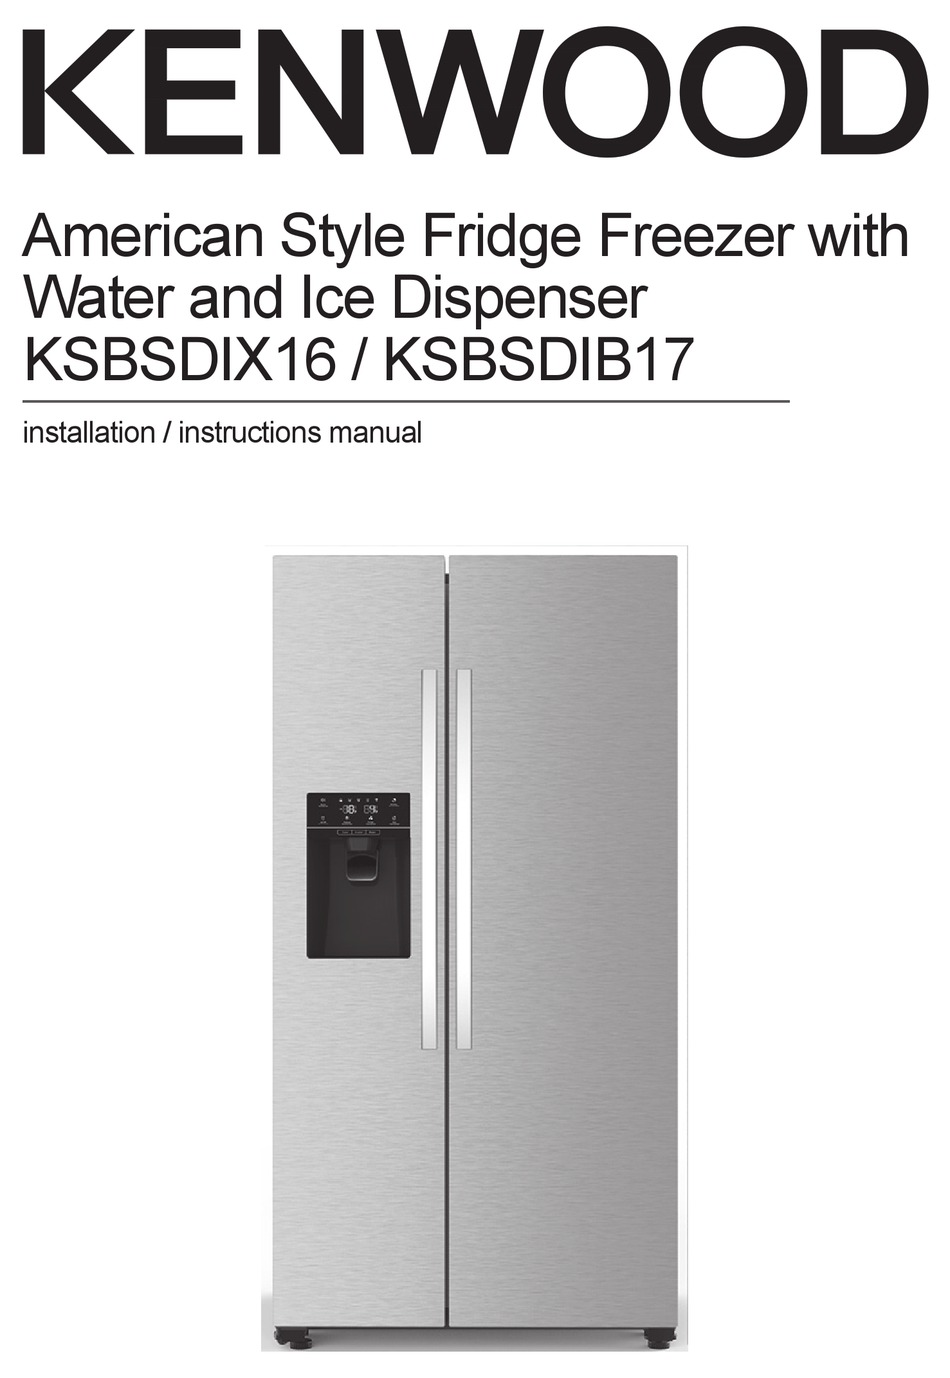 11+ Kenwood american style fridge freezer with water and ice dispenser model ksbsdix16 info